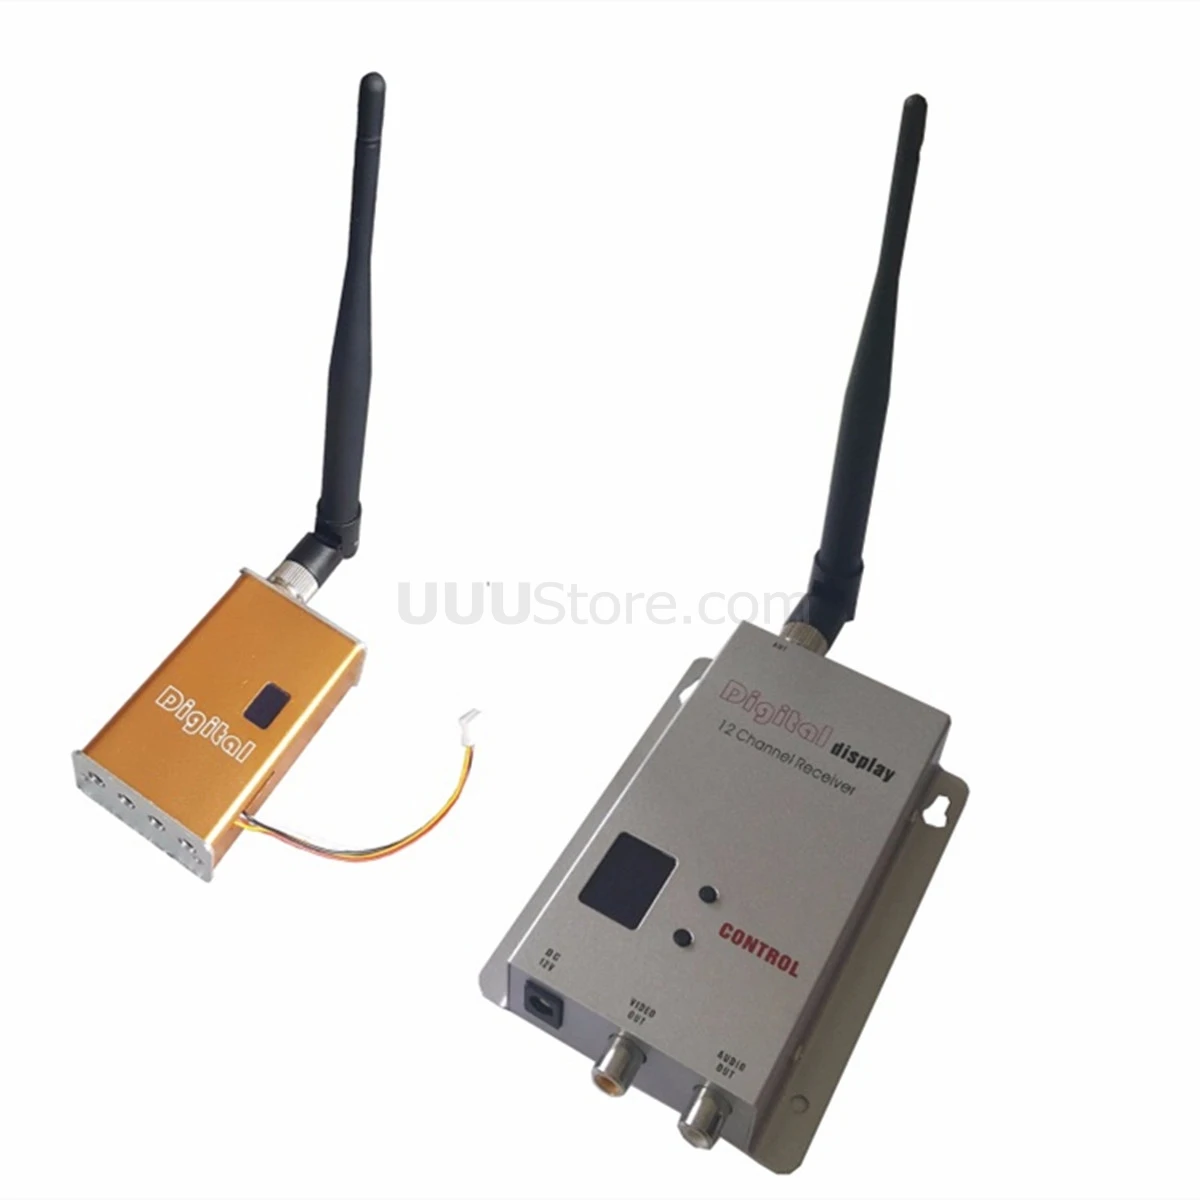 5000mW 5W Miniature FPV Video Sender 1.2G 1200Mhz Audio Video Wireless Transmitter and Receiver 30km LOS Long Distance 1